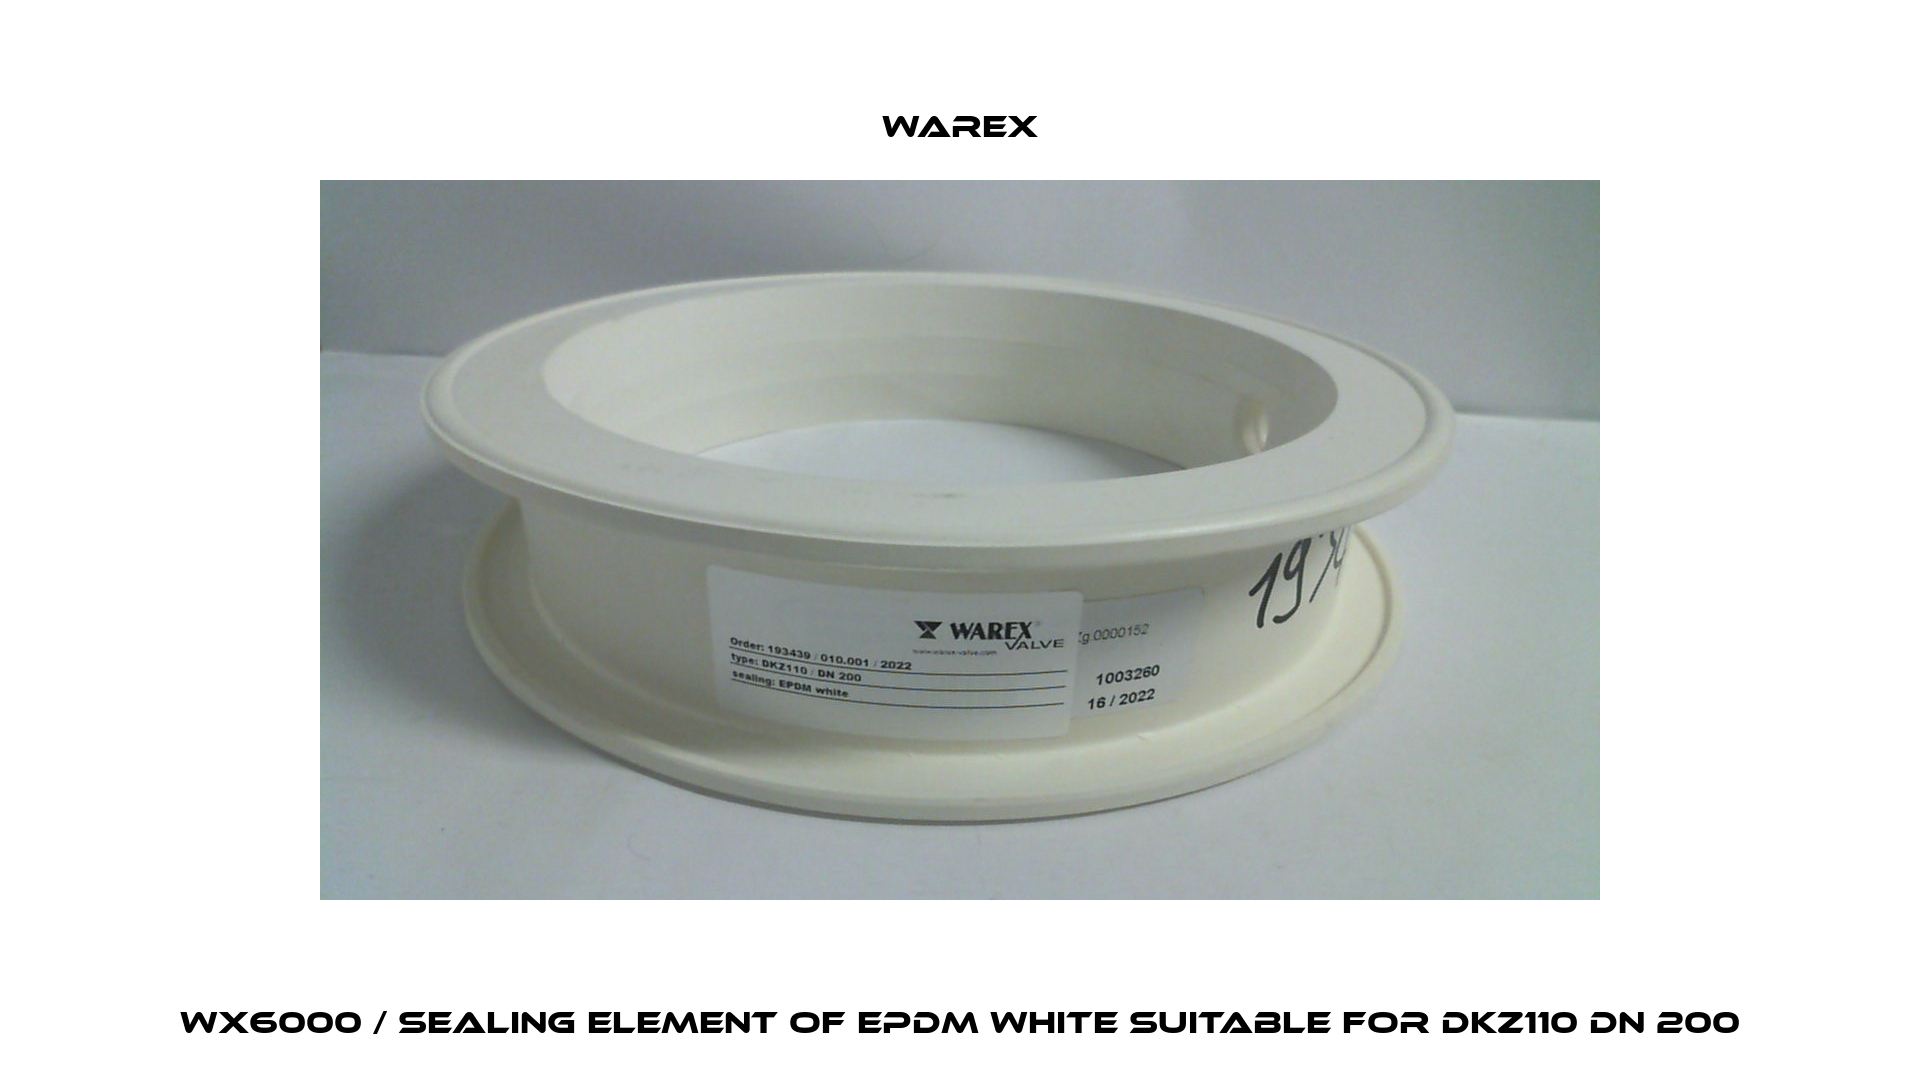 WX6000 / sealing element of EPDM white suitable for DKZ110 DN 200 Warex